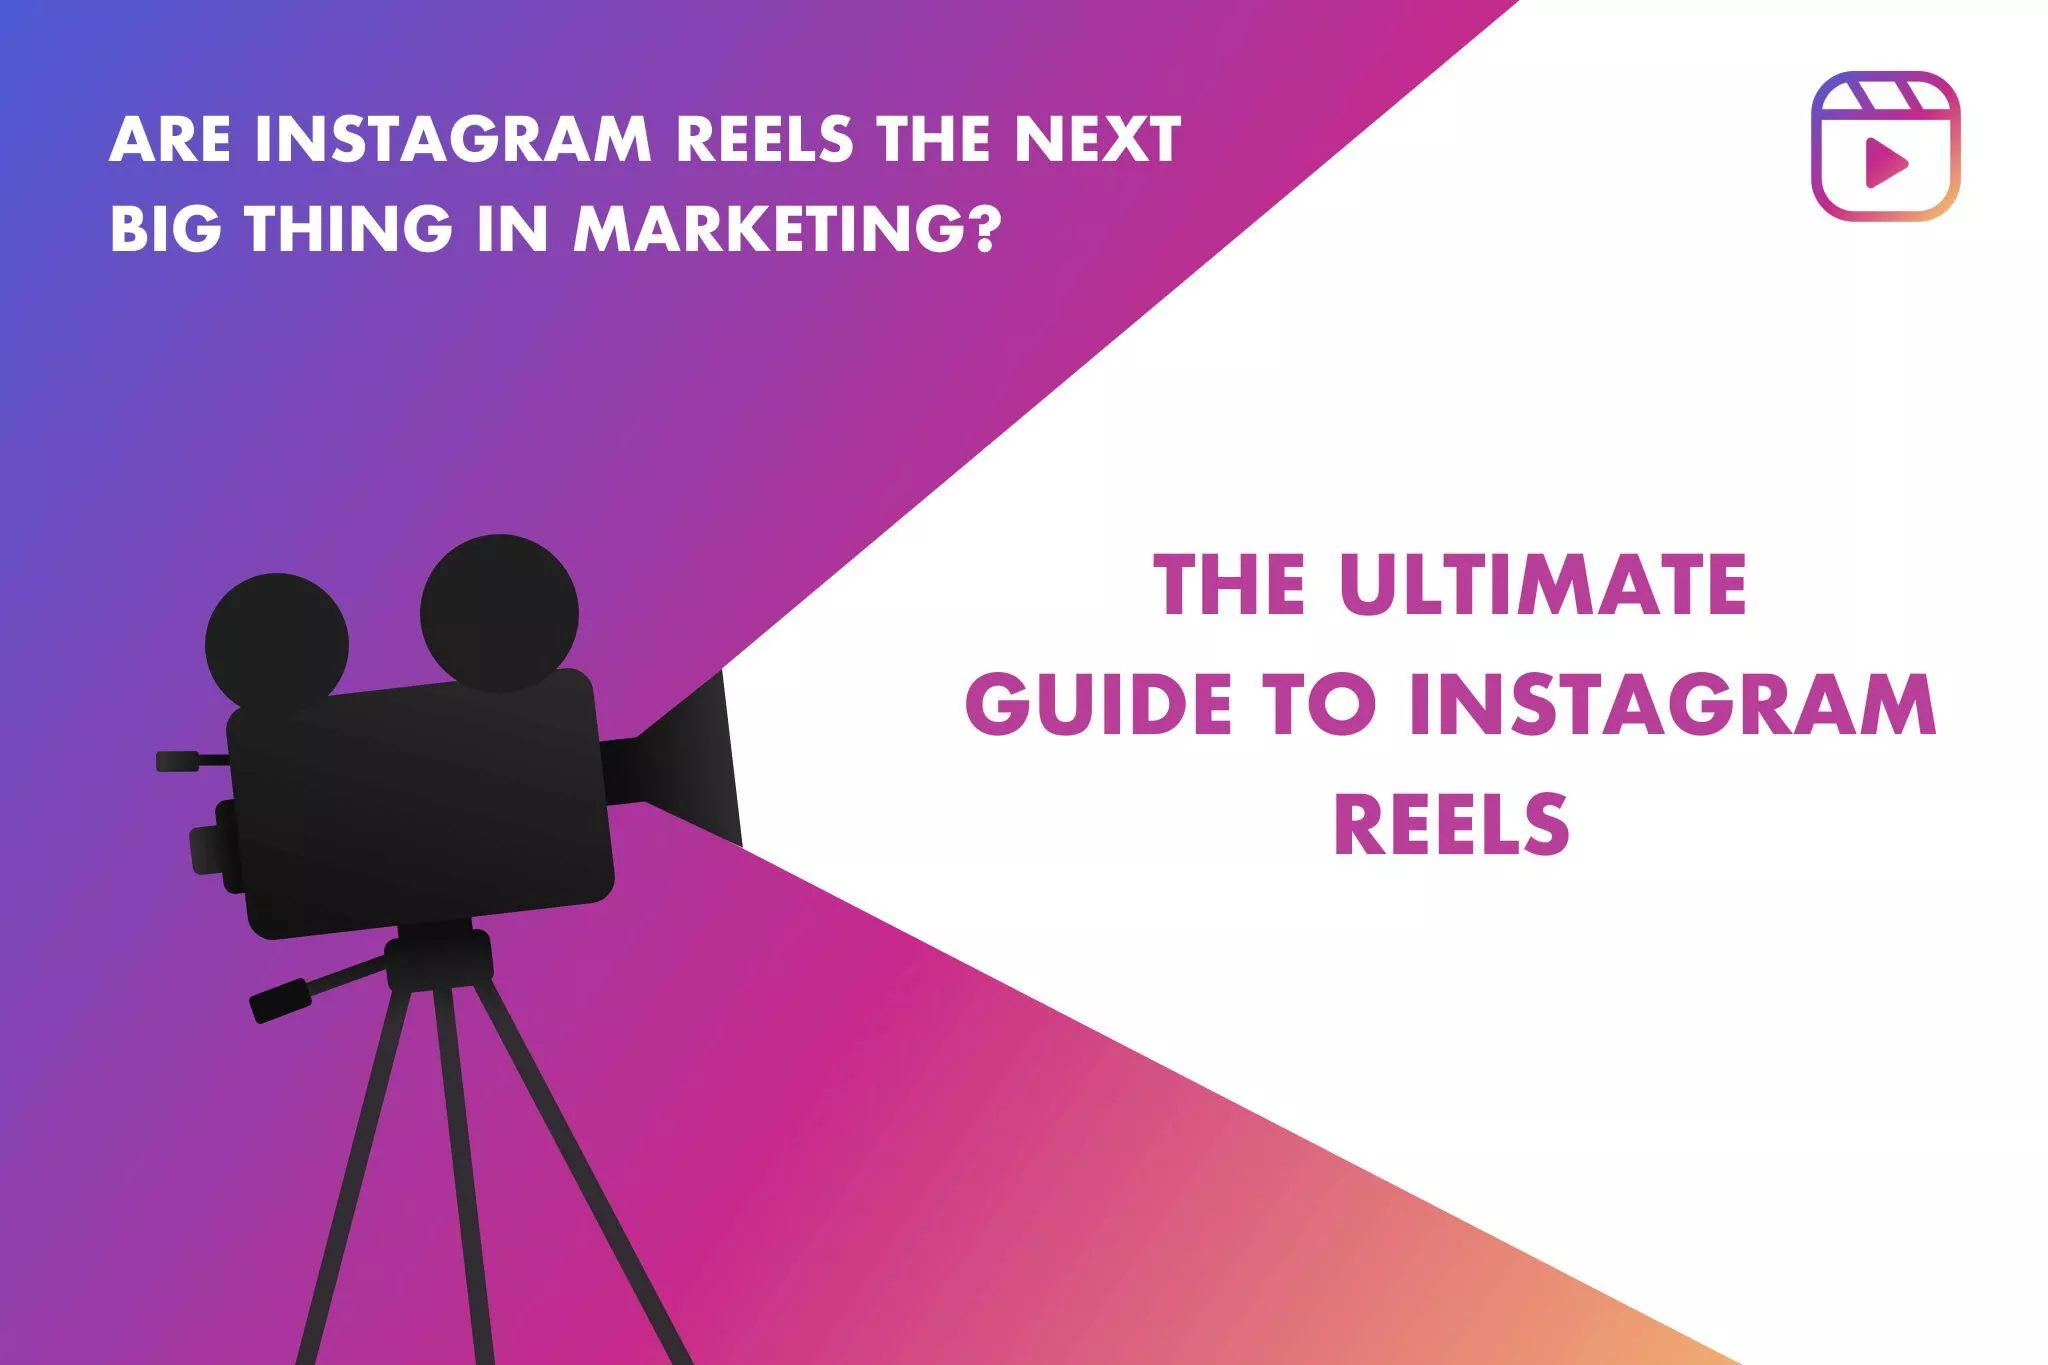 Are Instagram Reels the next big thing in Marketing?